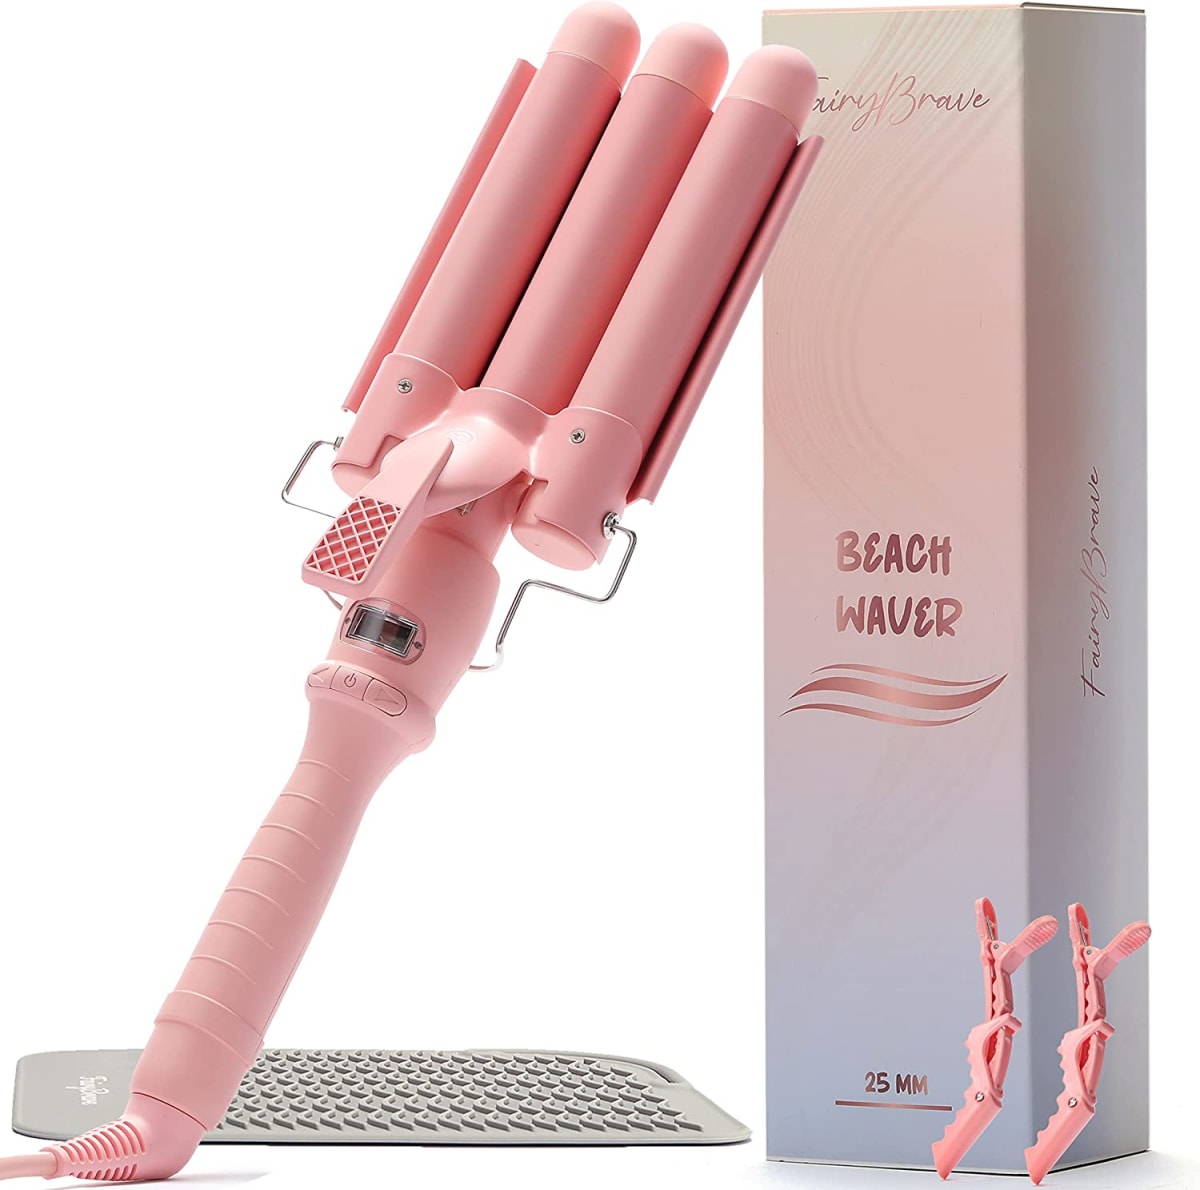 3 Barrel Curling Iron Wand - Triple Hair Waver & Crimper for Beach Waves Set, Ceramic Tourmaline with Adjustable Temperature